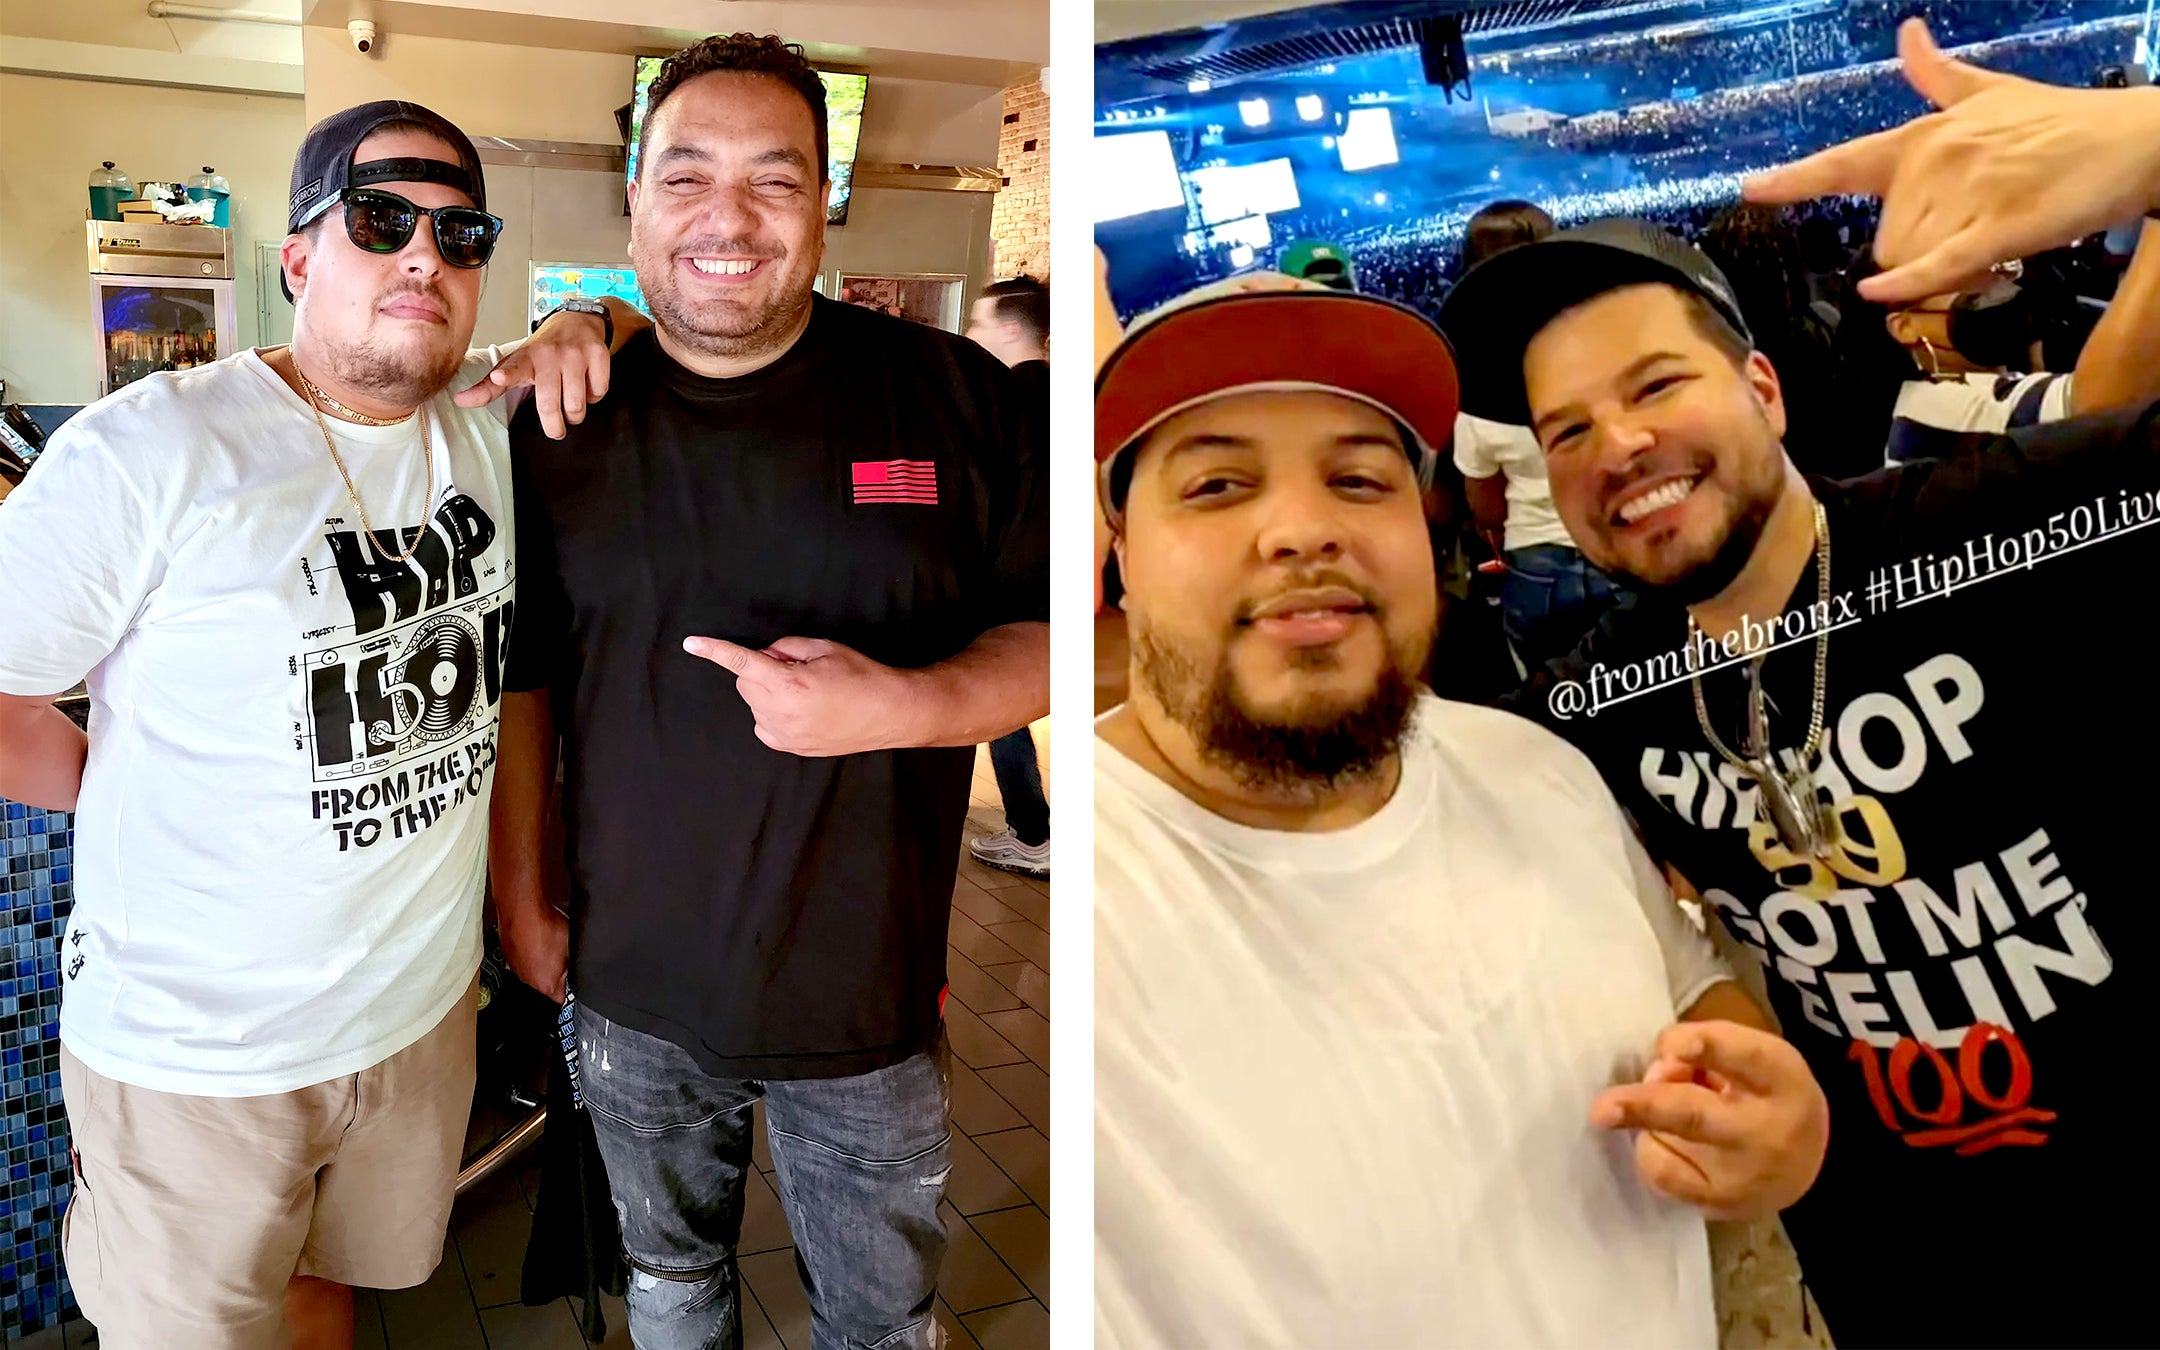 PICTURED (From L to R): Paul Ramirez with Cipha Sounds, Pablo D. Castilo Jr. with Anthony Ramirez II